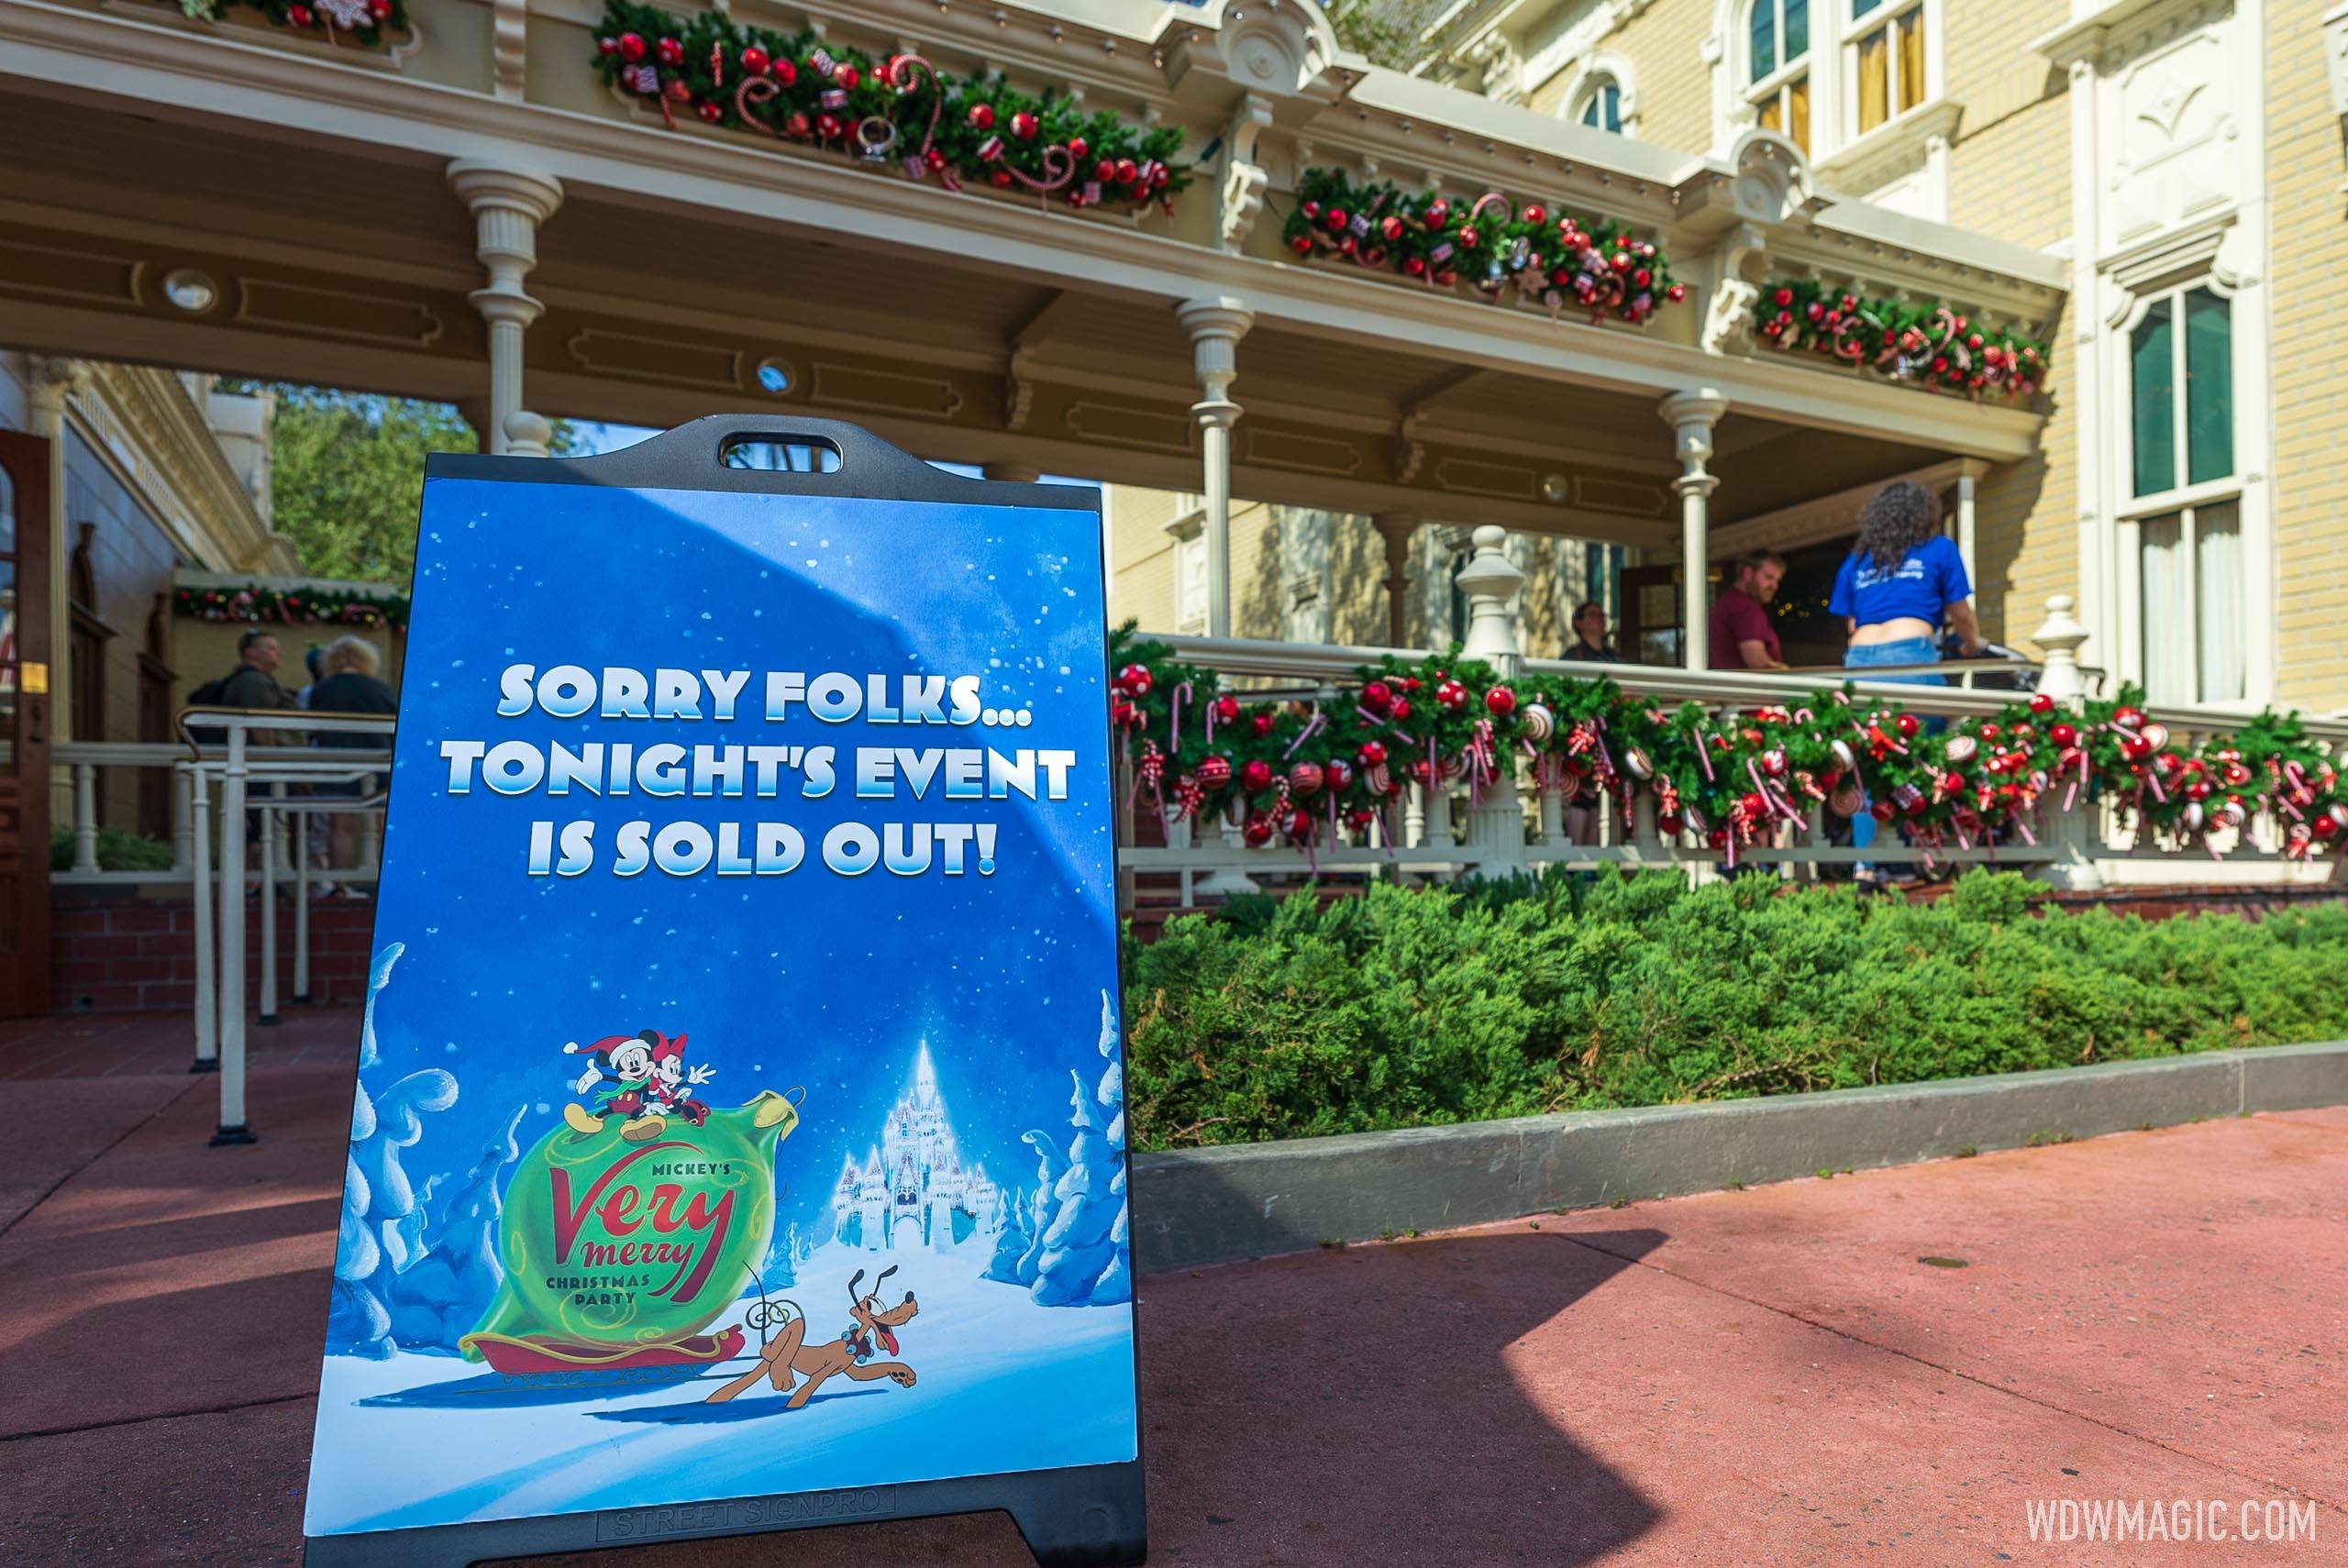 Mickey's Very Merry Christmas Party is now completely sold out for the 2022 holiday season at Walt Disney World